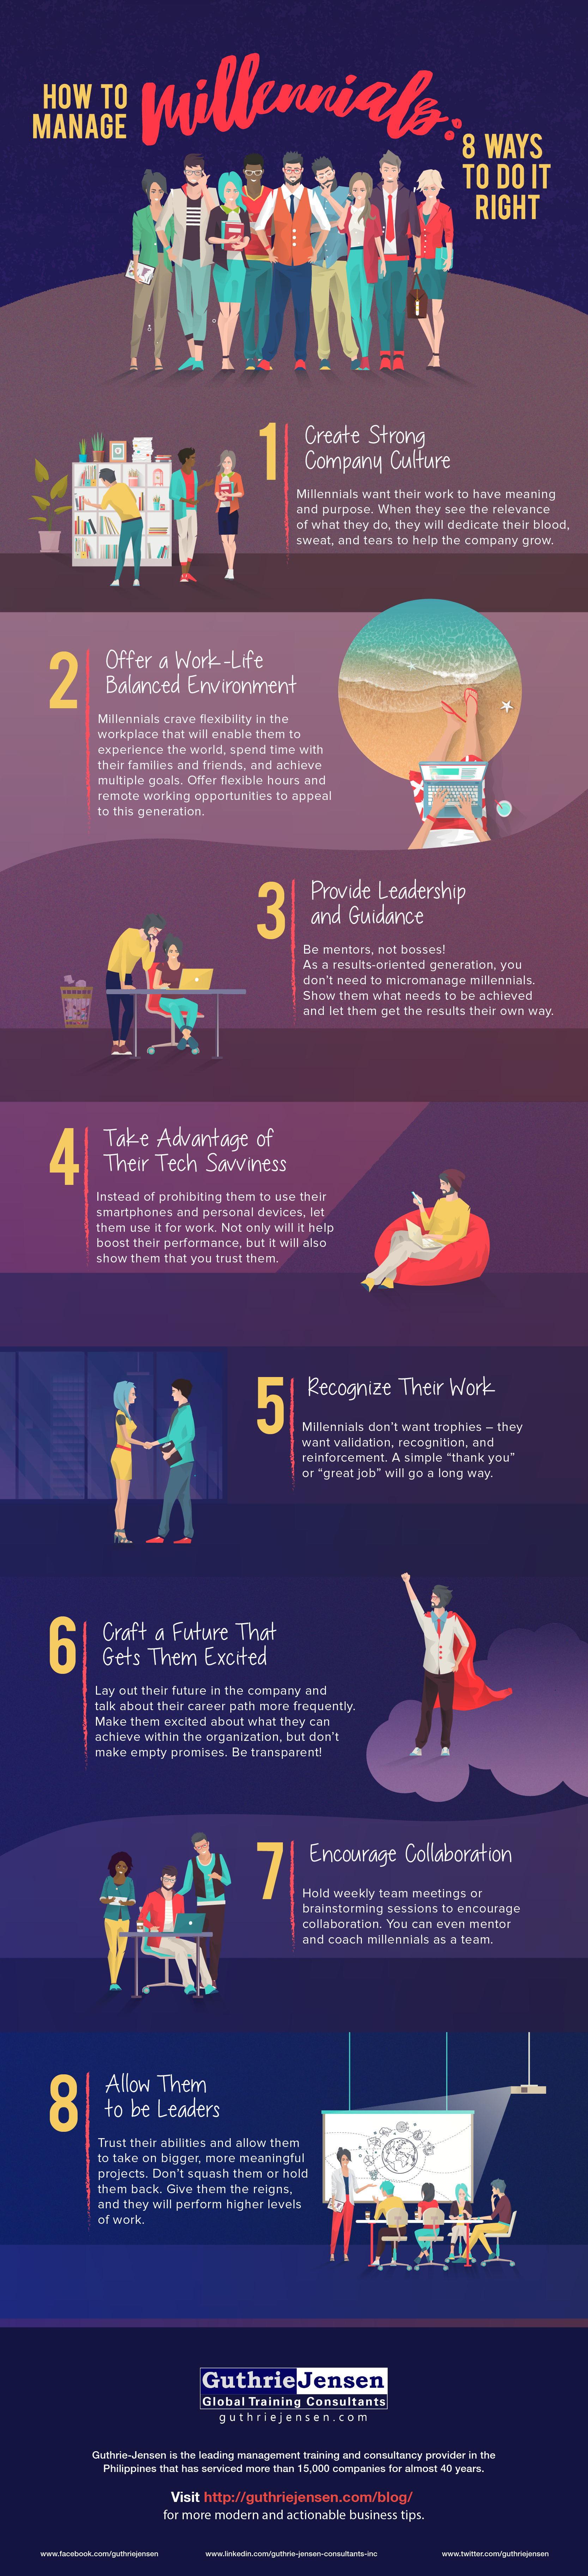 How to Manage Millennials: 8 Ways to Do it Right - #infographic